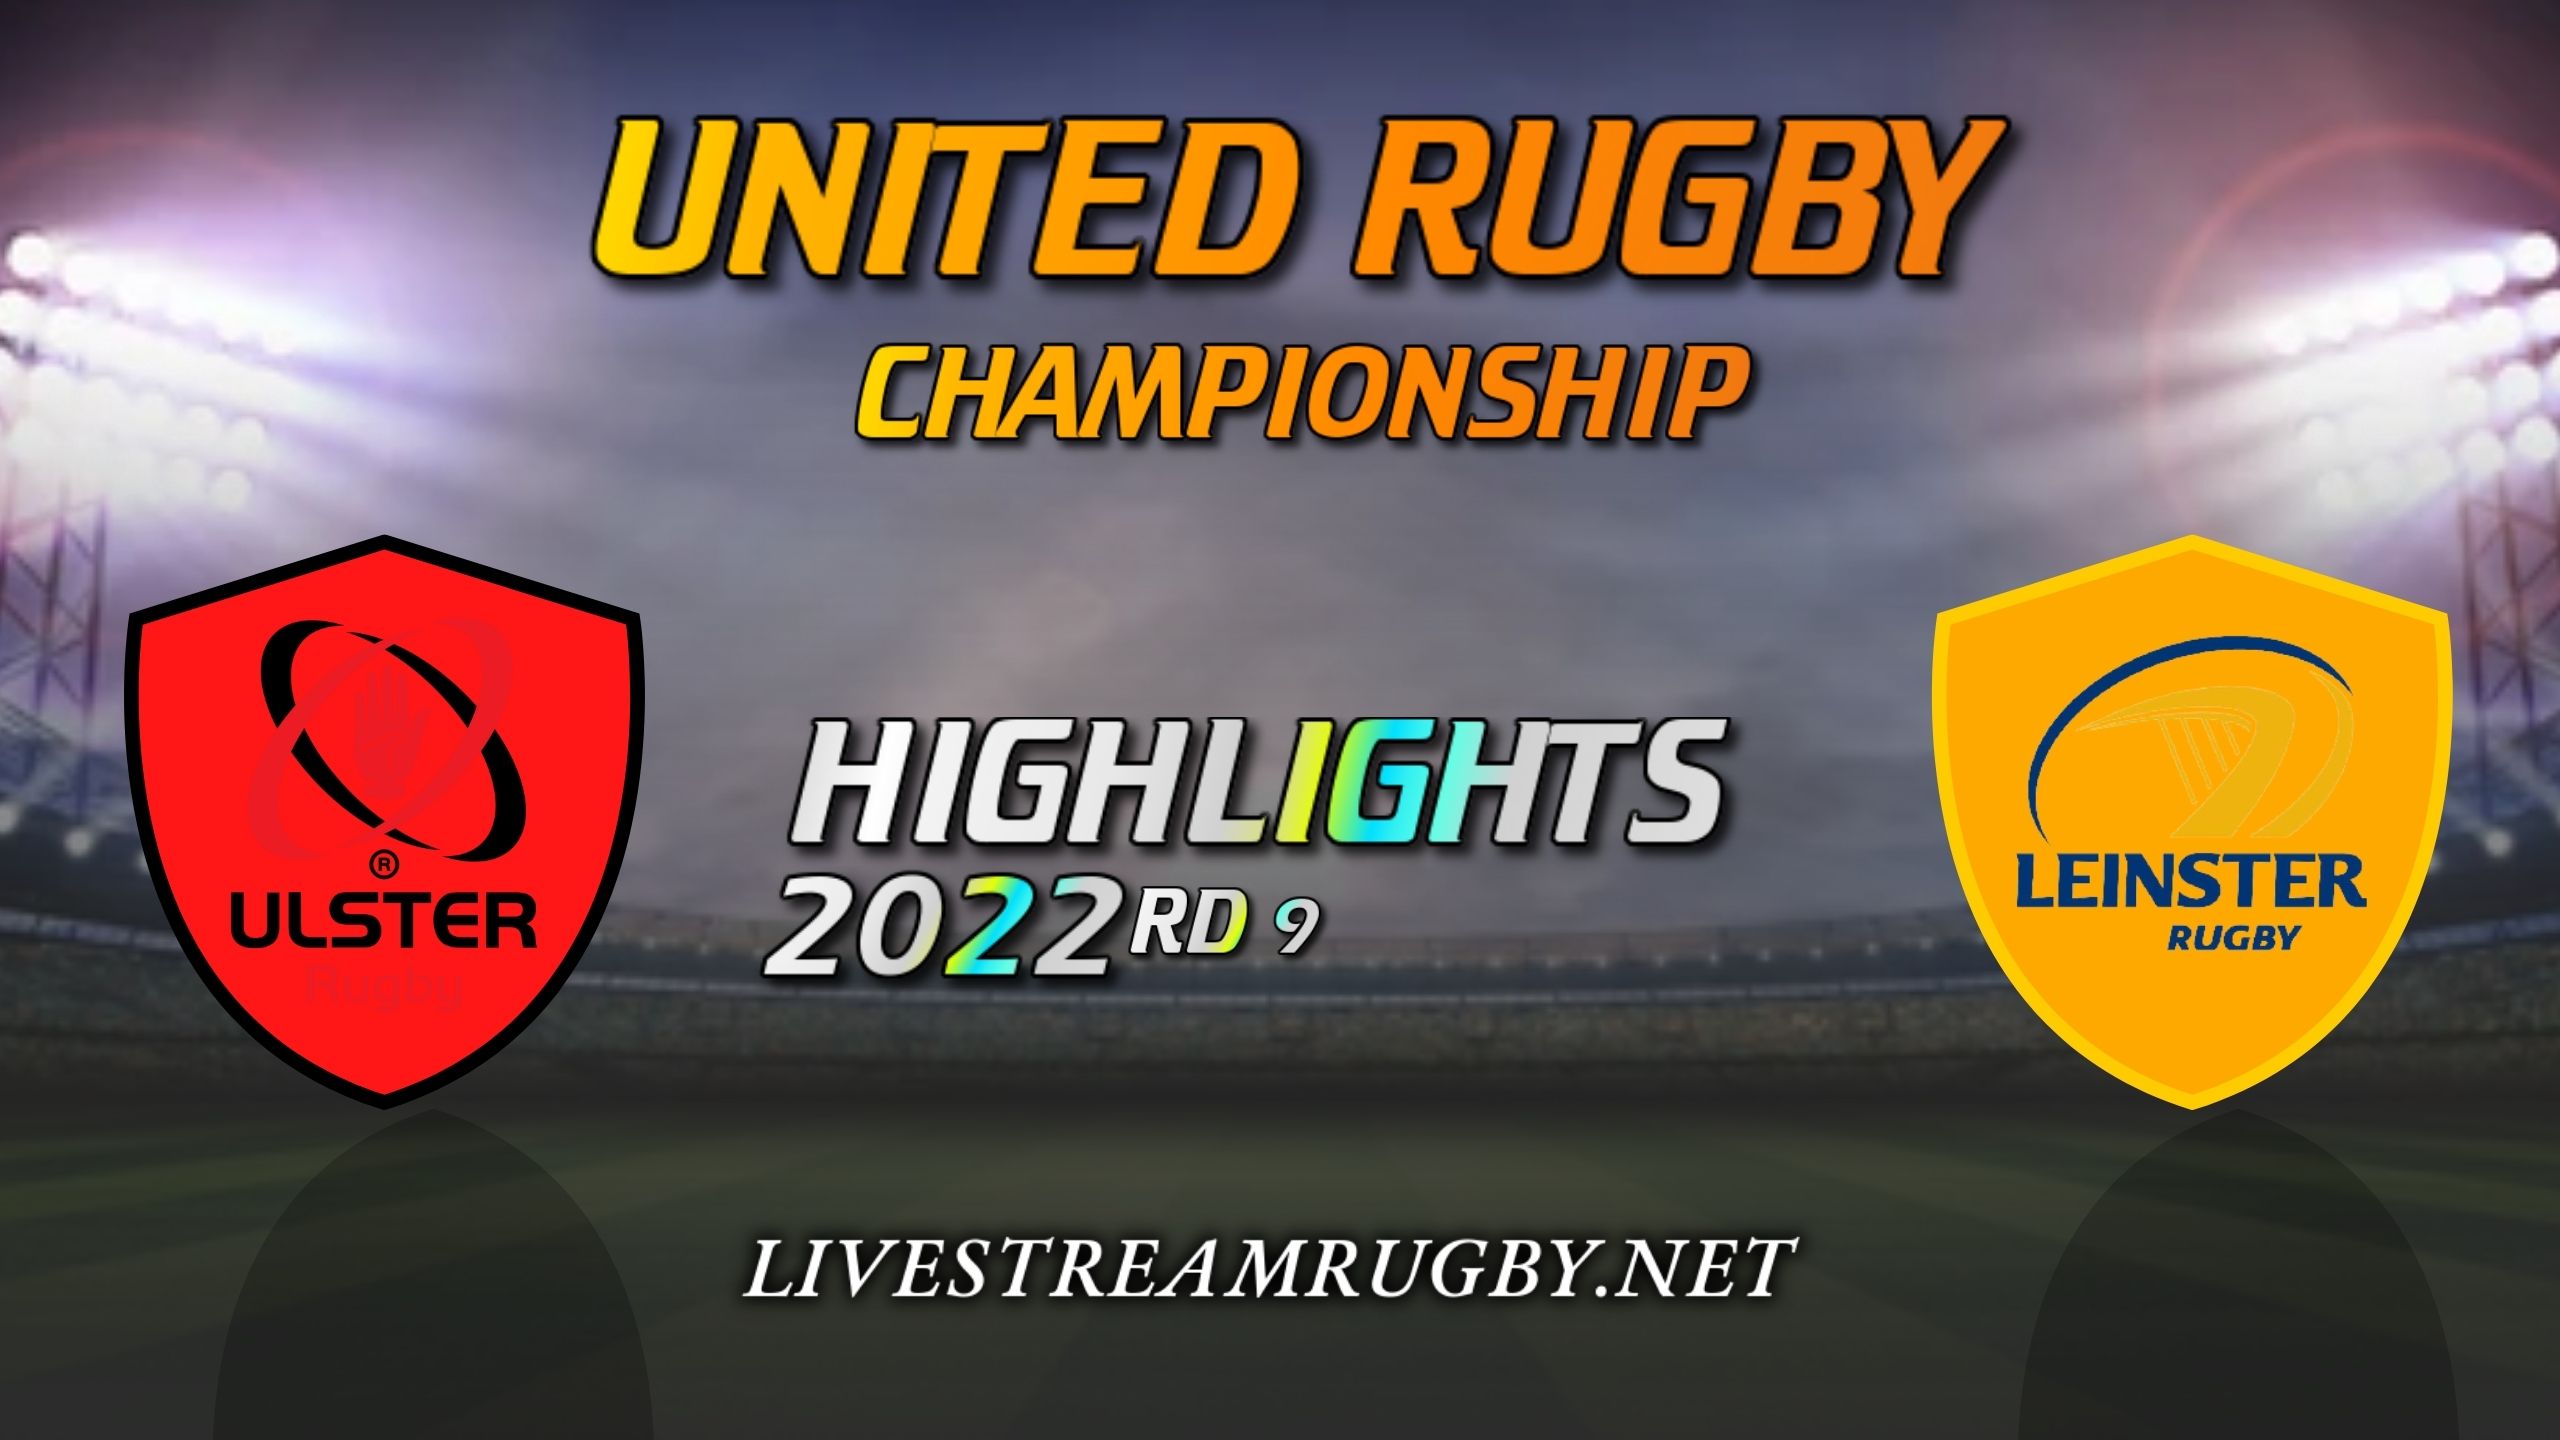 Ulster Vs Leinster Highlights 2022 Rd 9 United Rugby